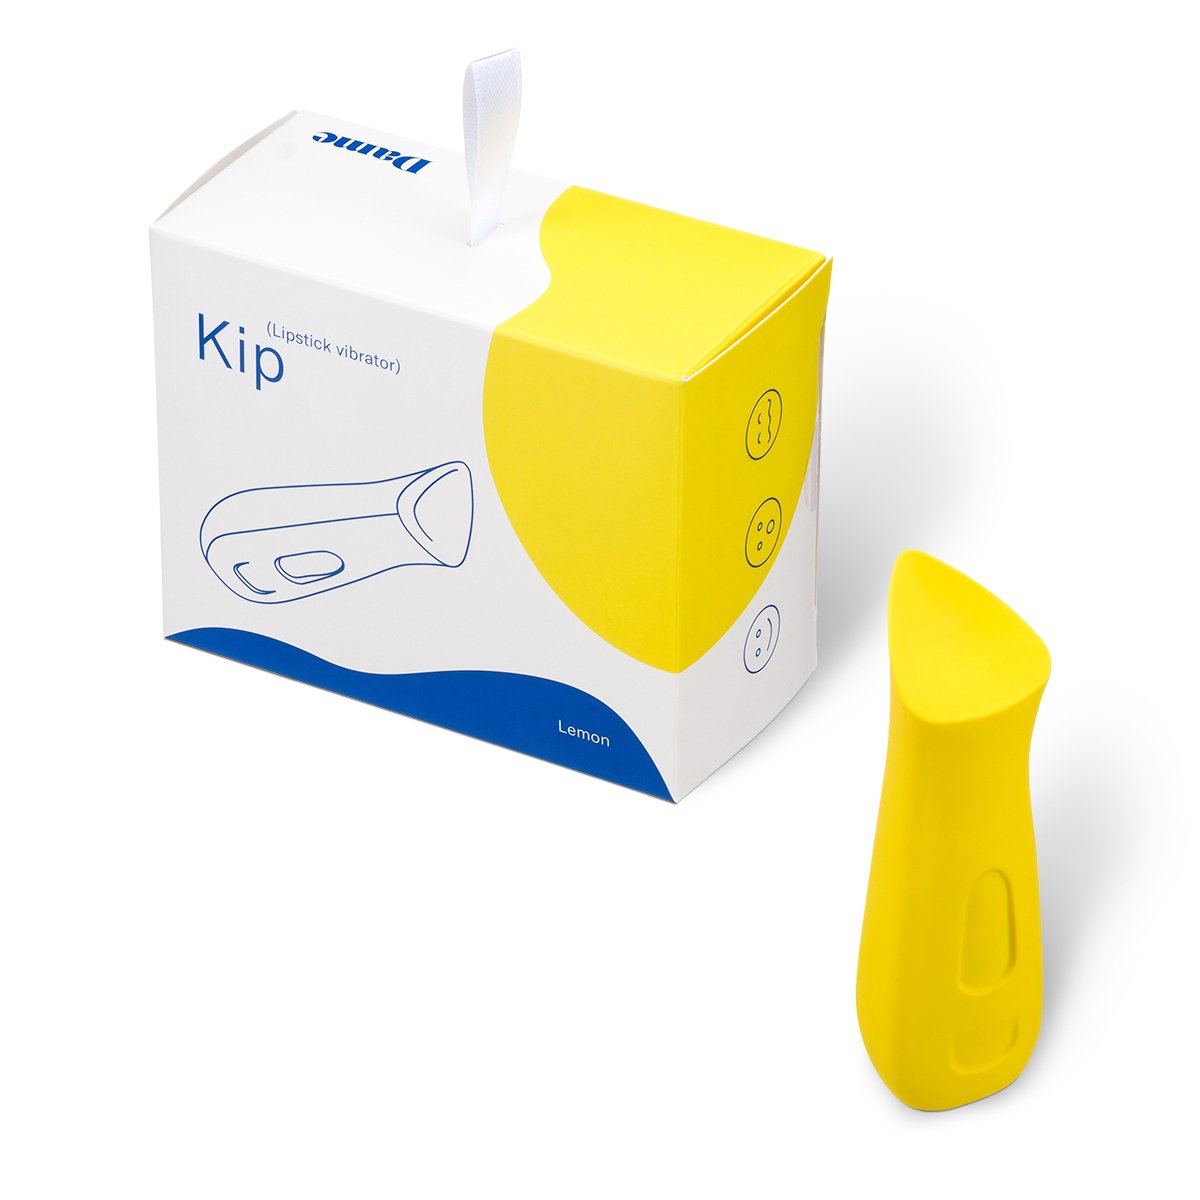 Dame Products KIP - Buy At Luxury Toy X - Free 3-Day Shipping